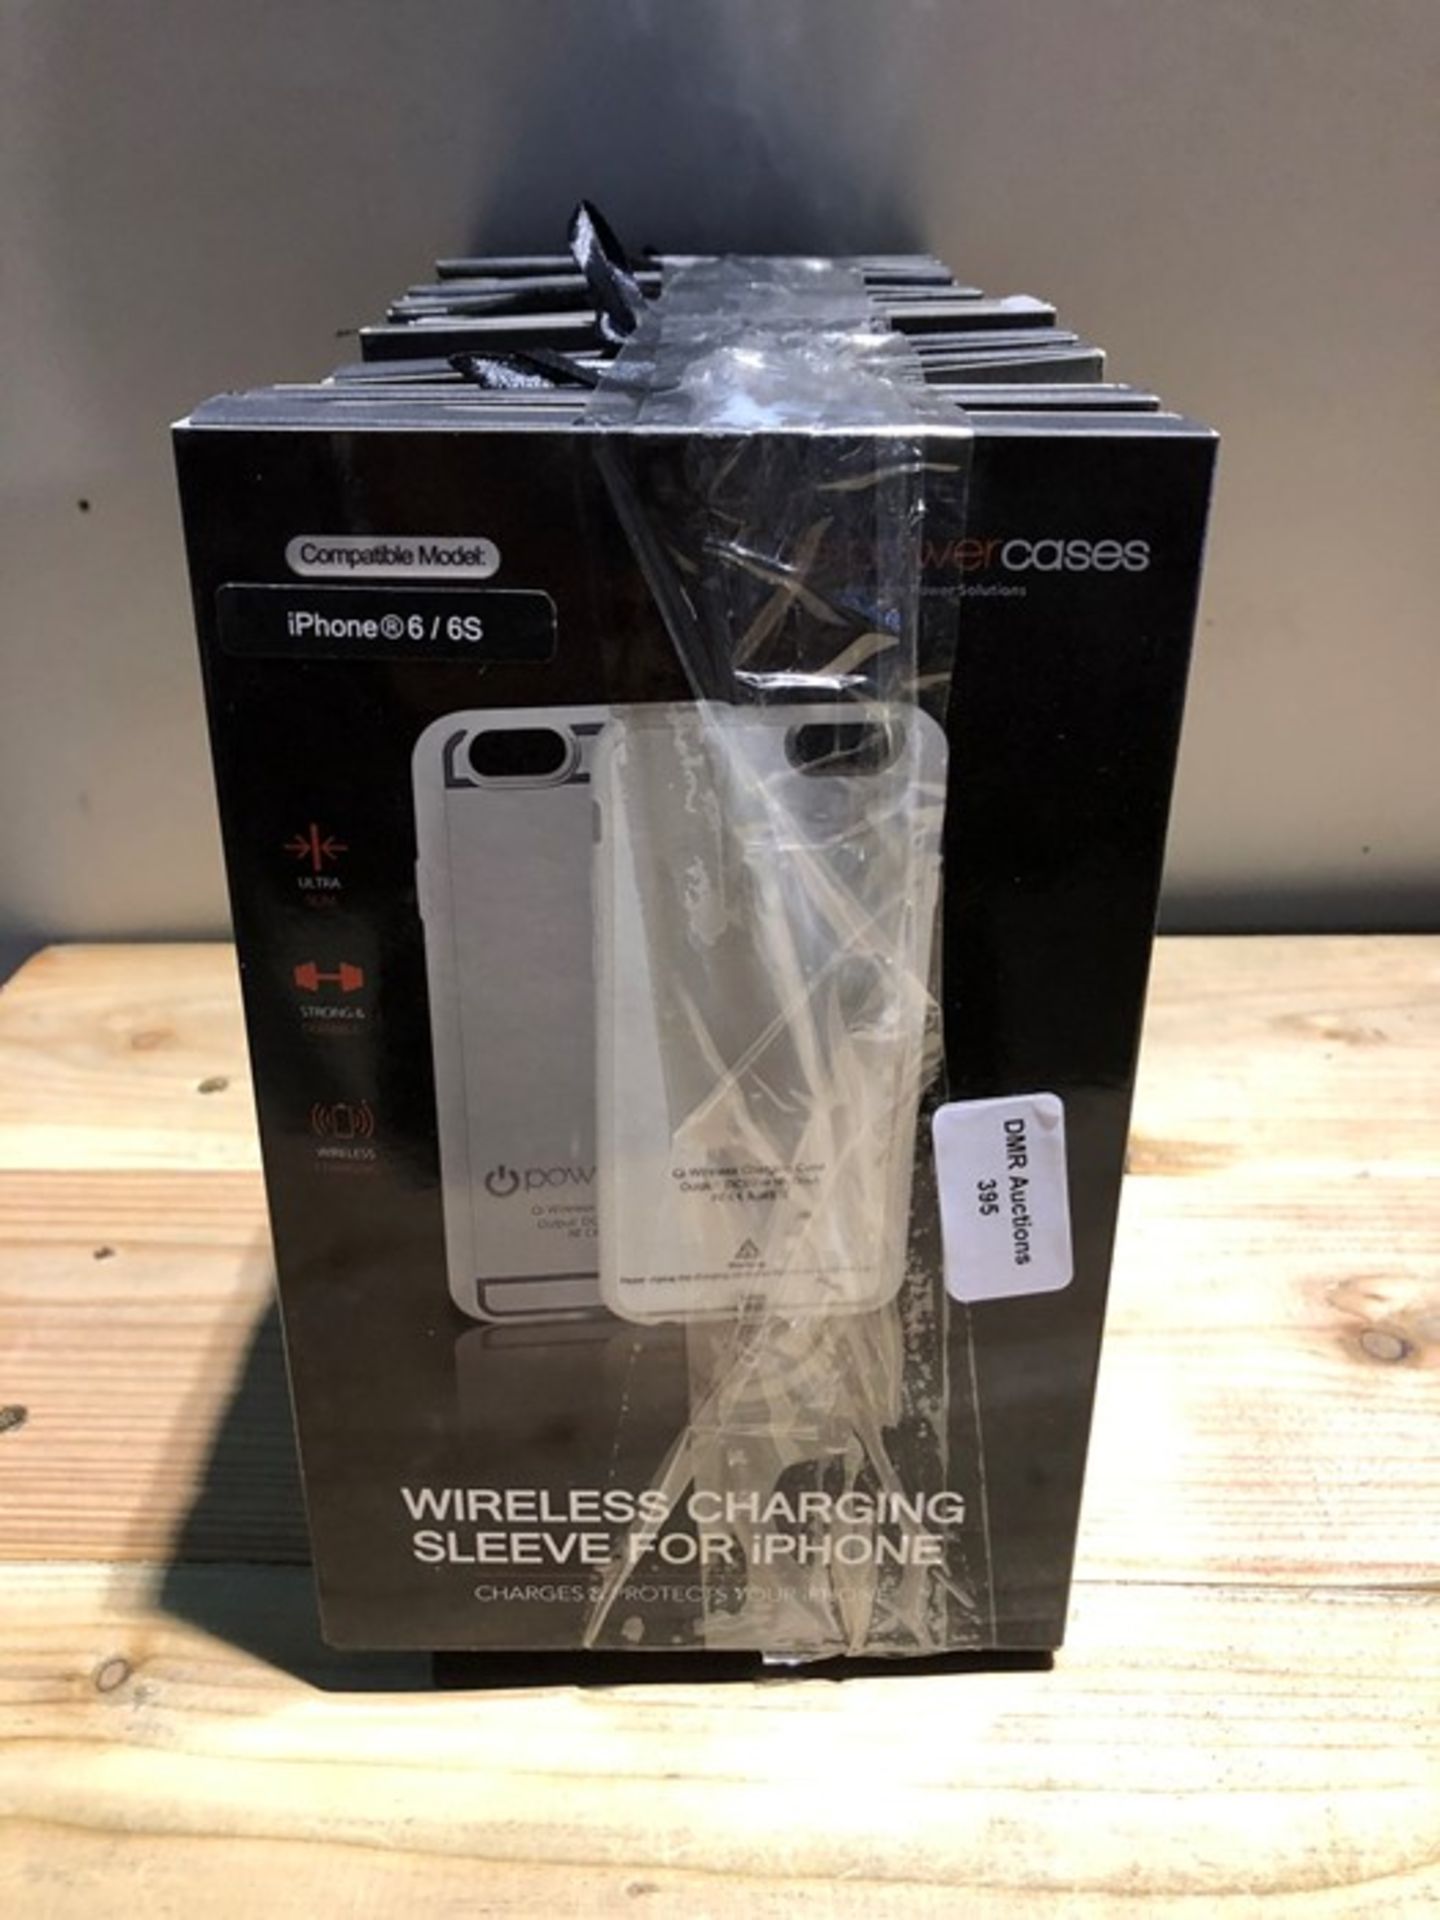 1 LOT TO CONTAIN 10 BOXED WIRELESS CHARGING SLEEVE FOR IPHONE 6/6S (PUBLIC VIEWING AVAILABLE)